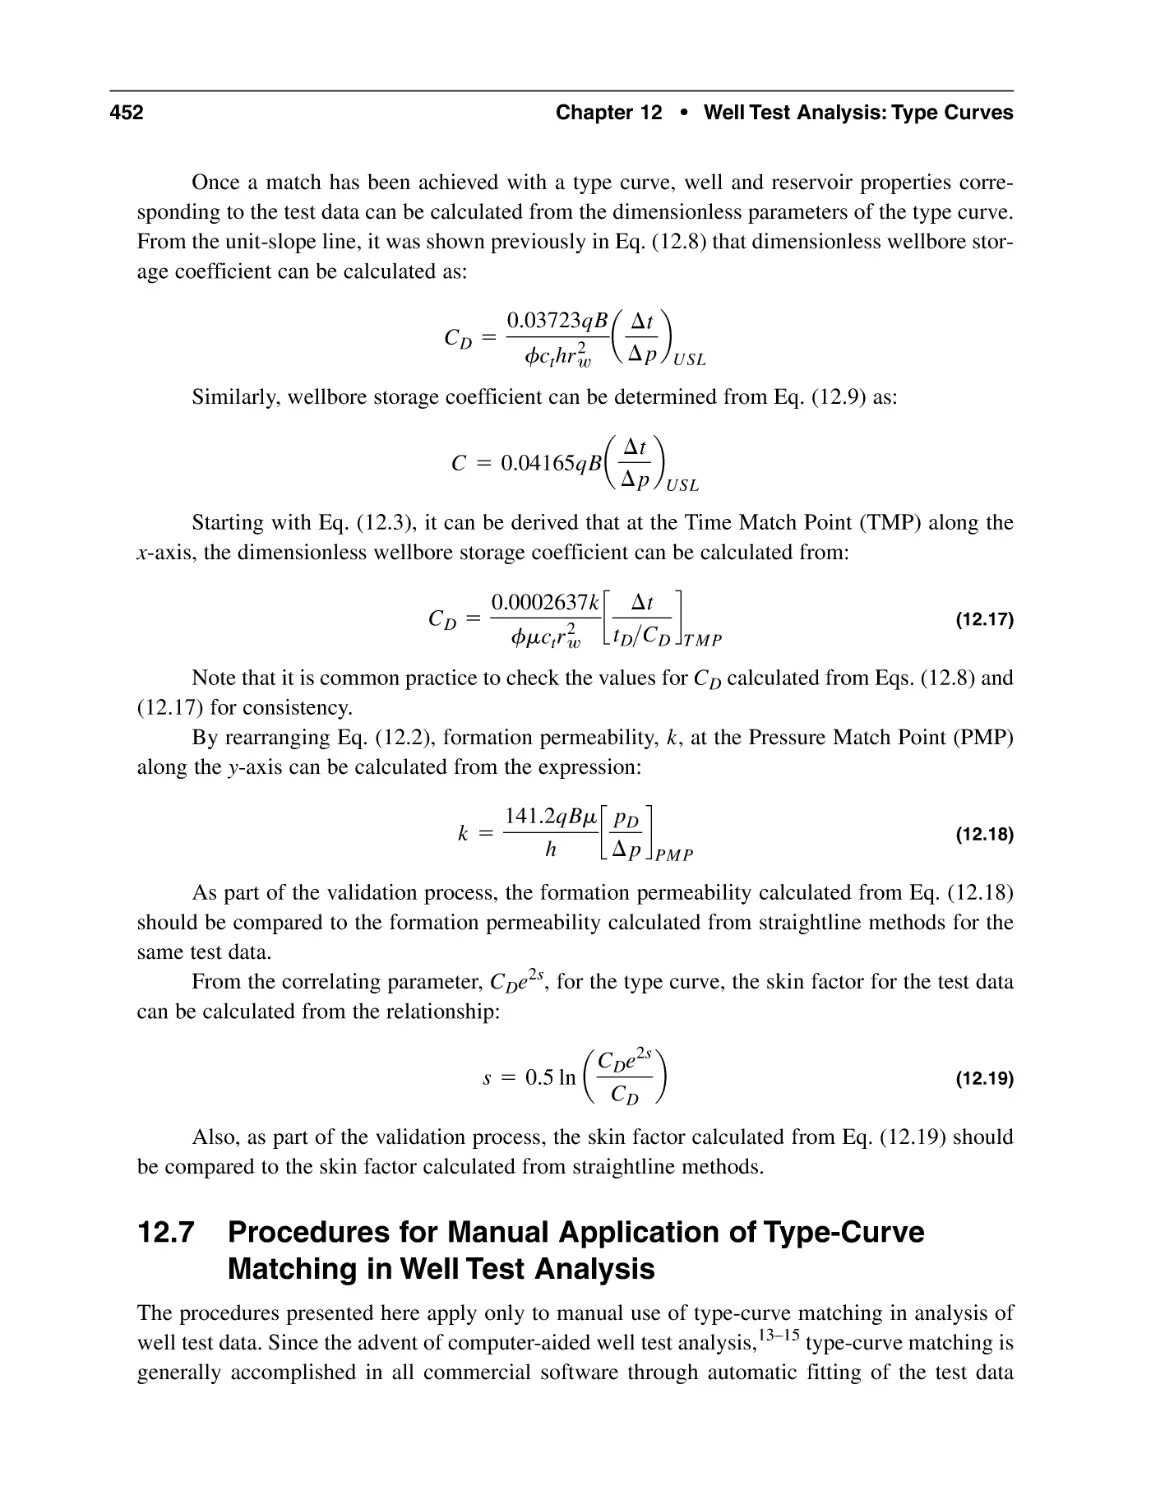 12.7 Procedures for Manual Application of Type-Curve Matching in Well Test Analysis